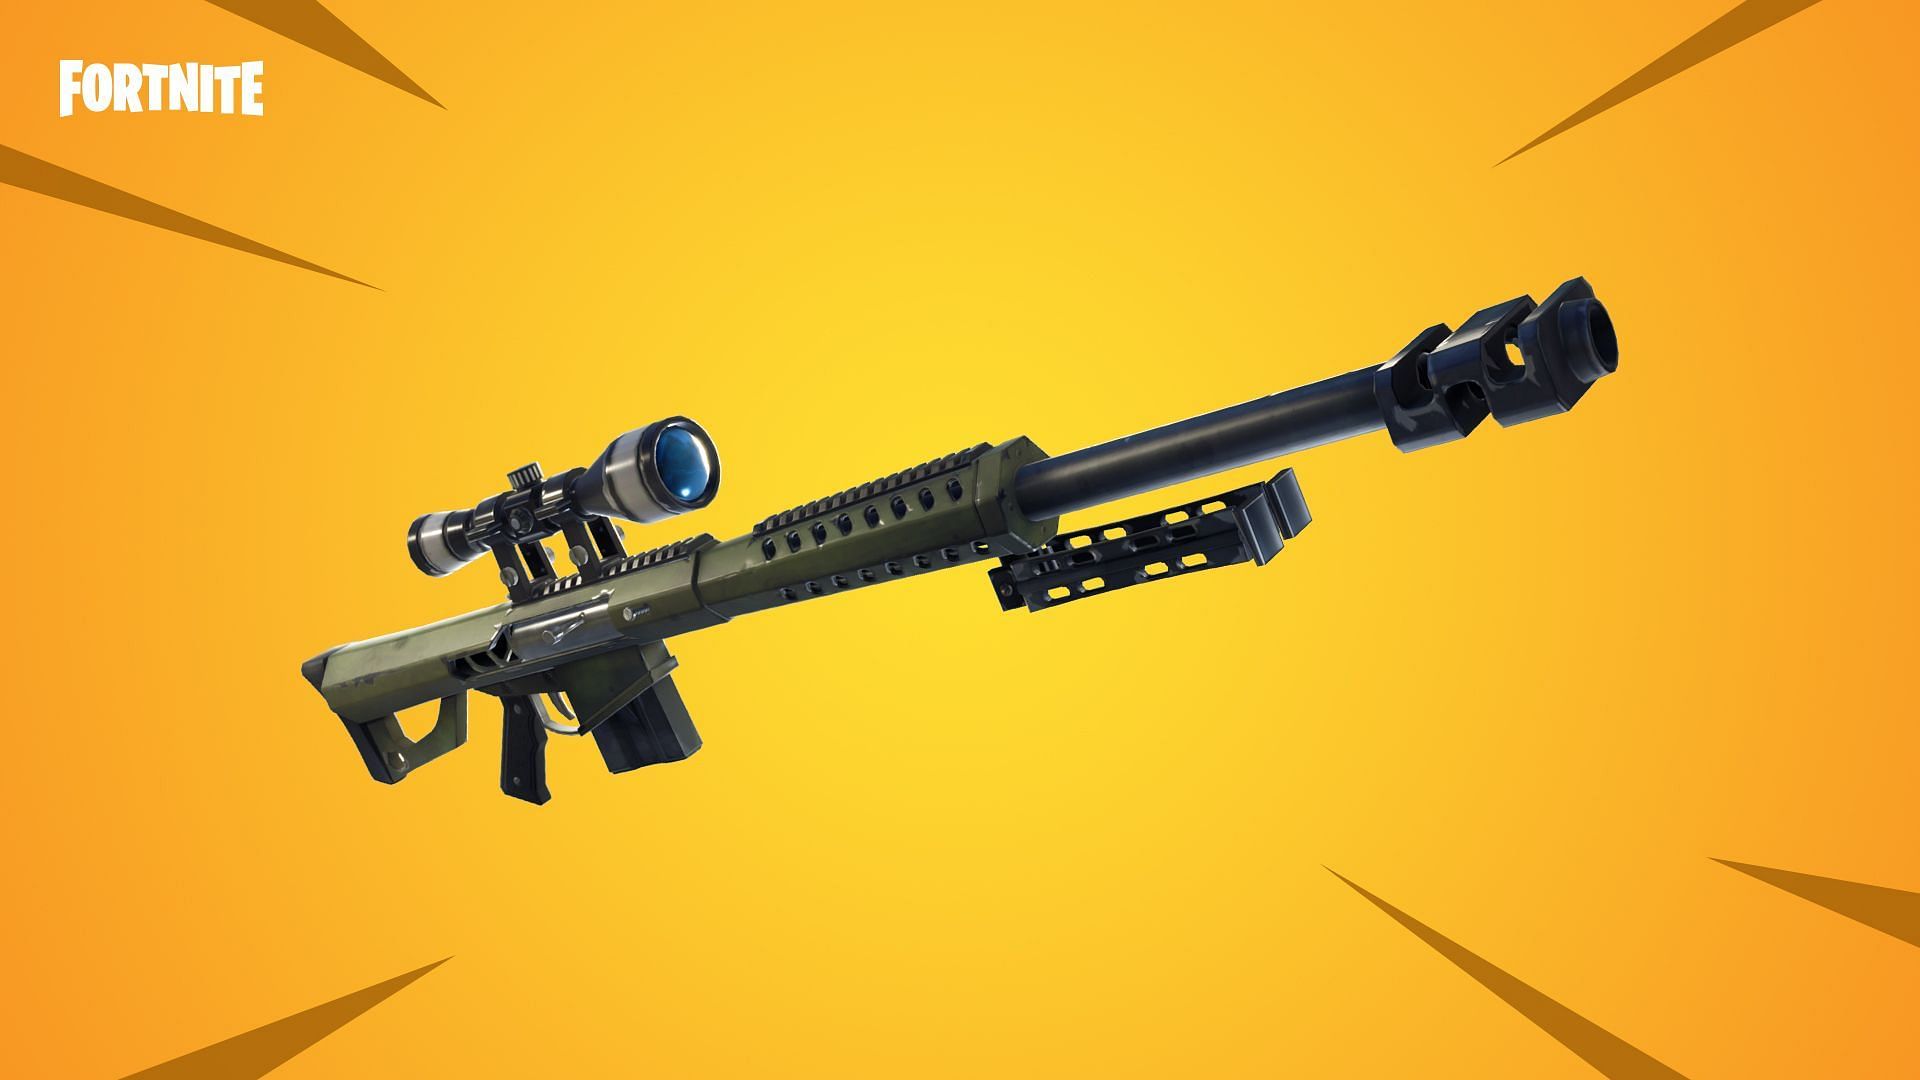 Fortnite ruins the one weapon that fans loved with all their heart (Image via Epic Games)